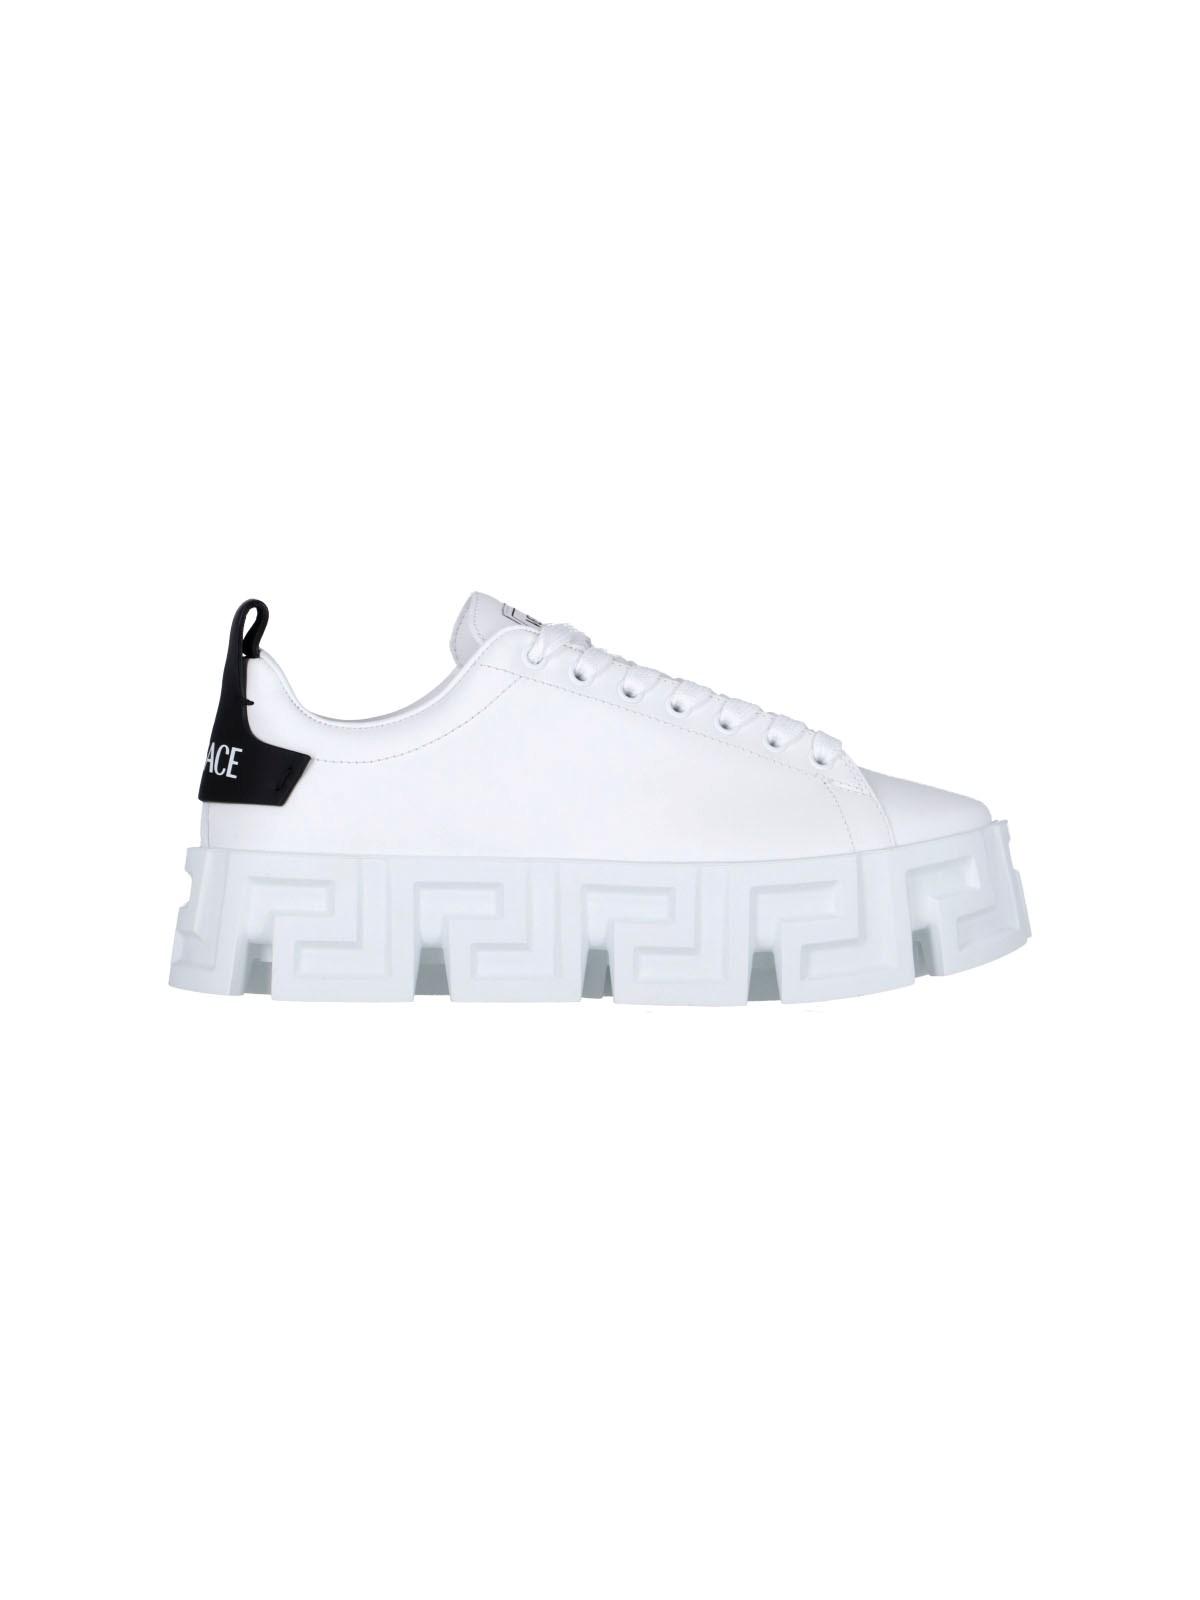 Versace 'greca Labyrinth' Sneakers for Men | Lyst